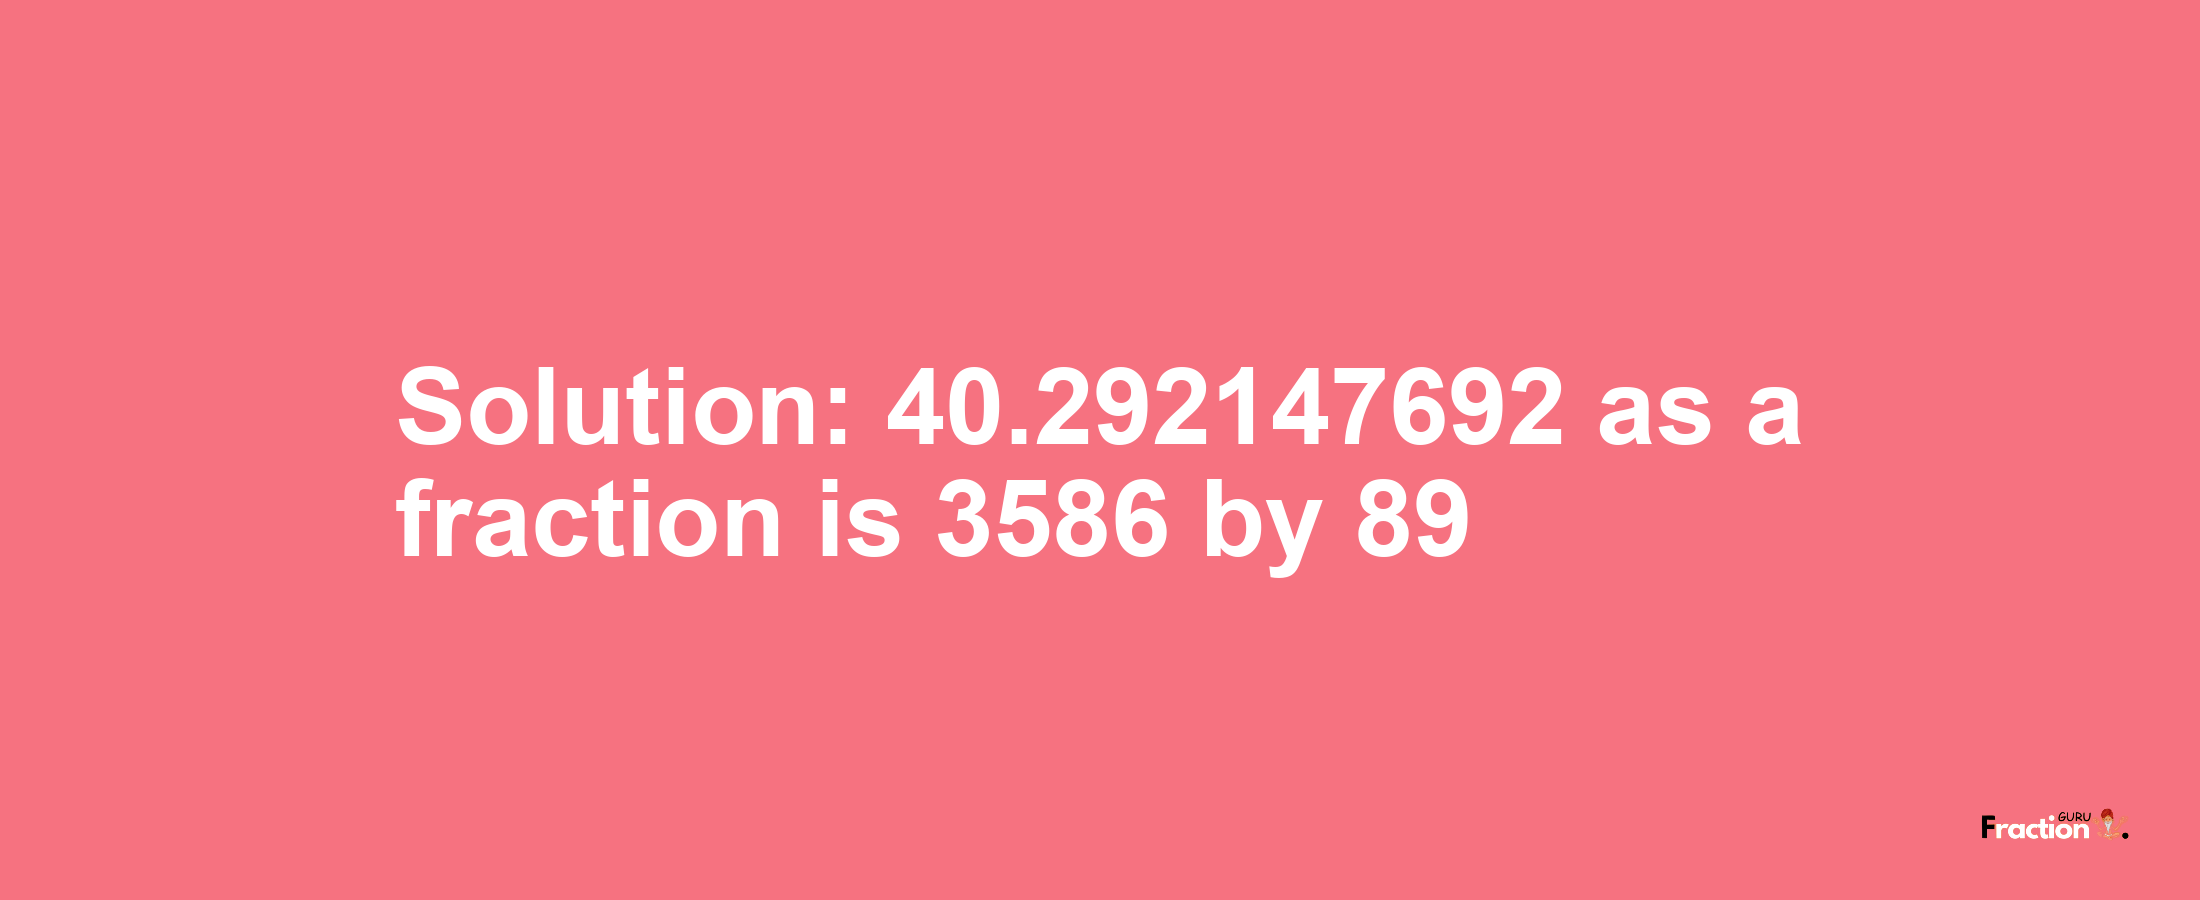 Solution:40.292147692 as a fraction is 3586/89